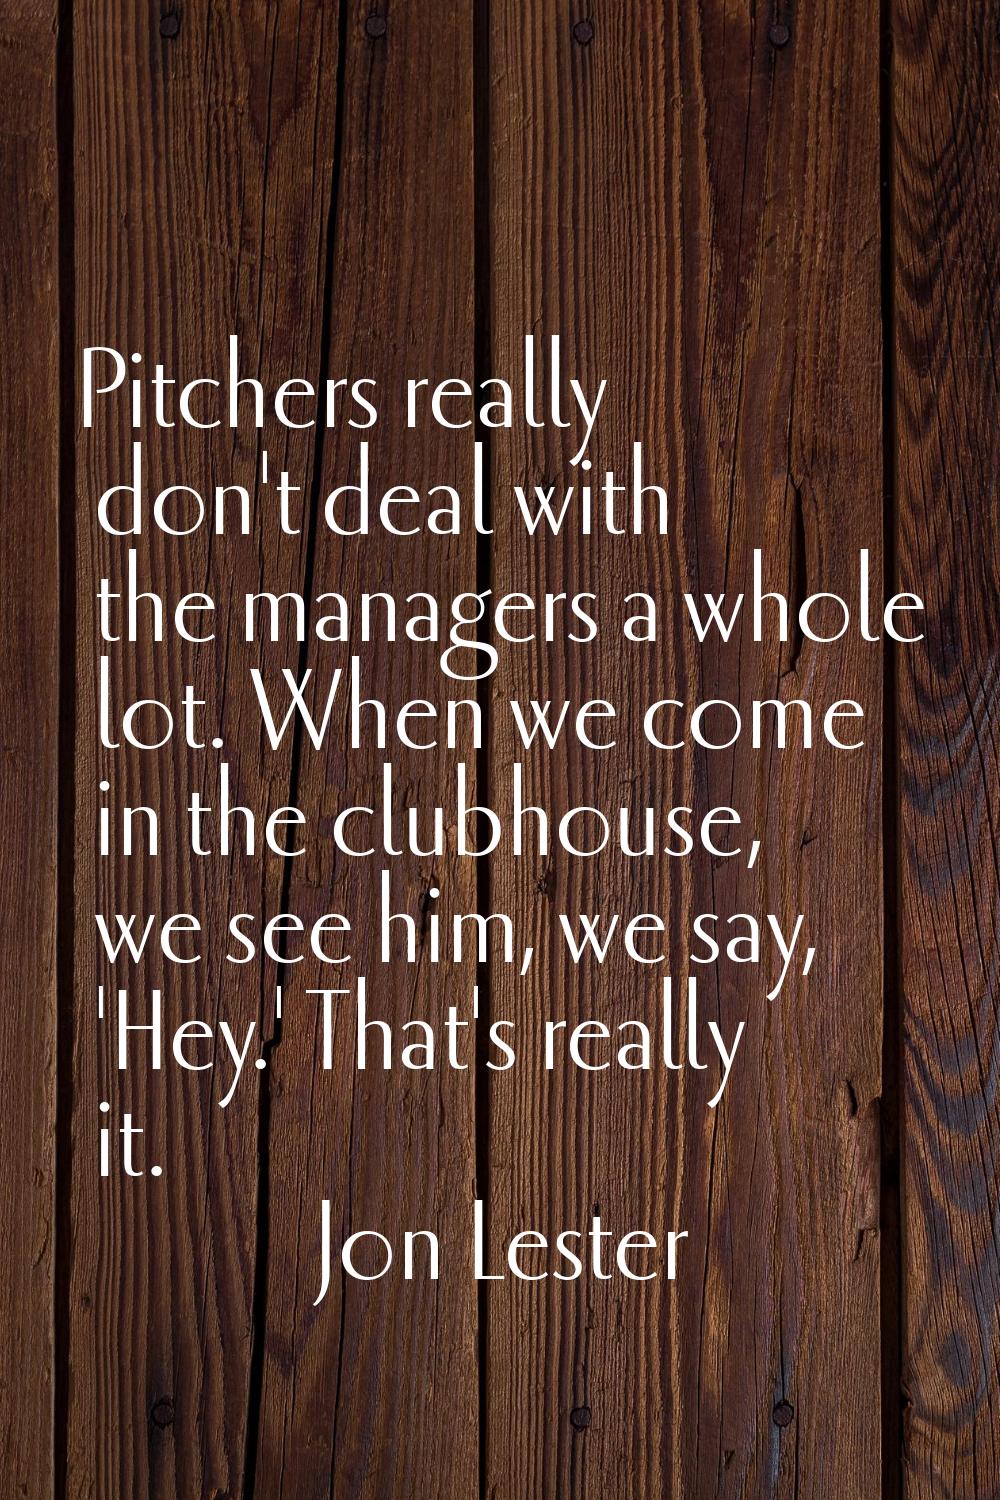 Pitchers really don't deal with the managers a whole lot. When we come in the clubhouse, we see him